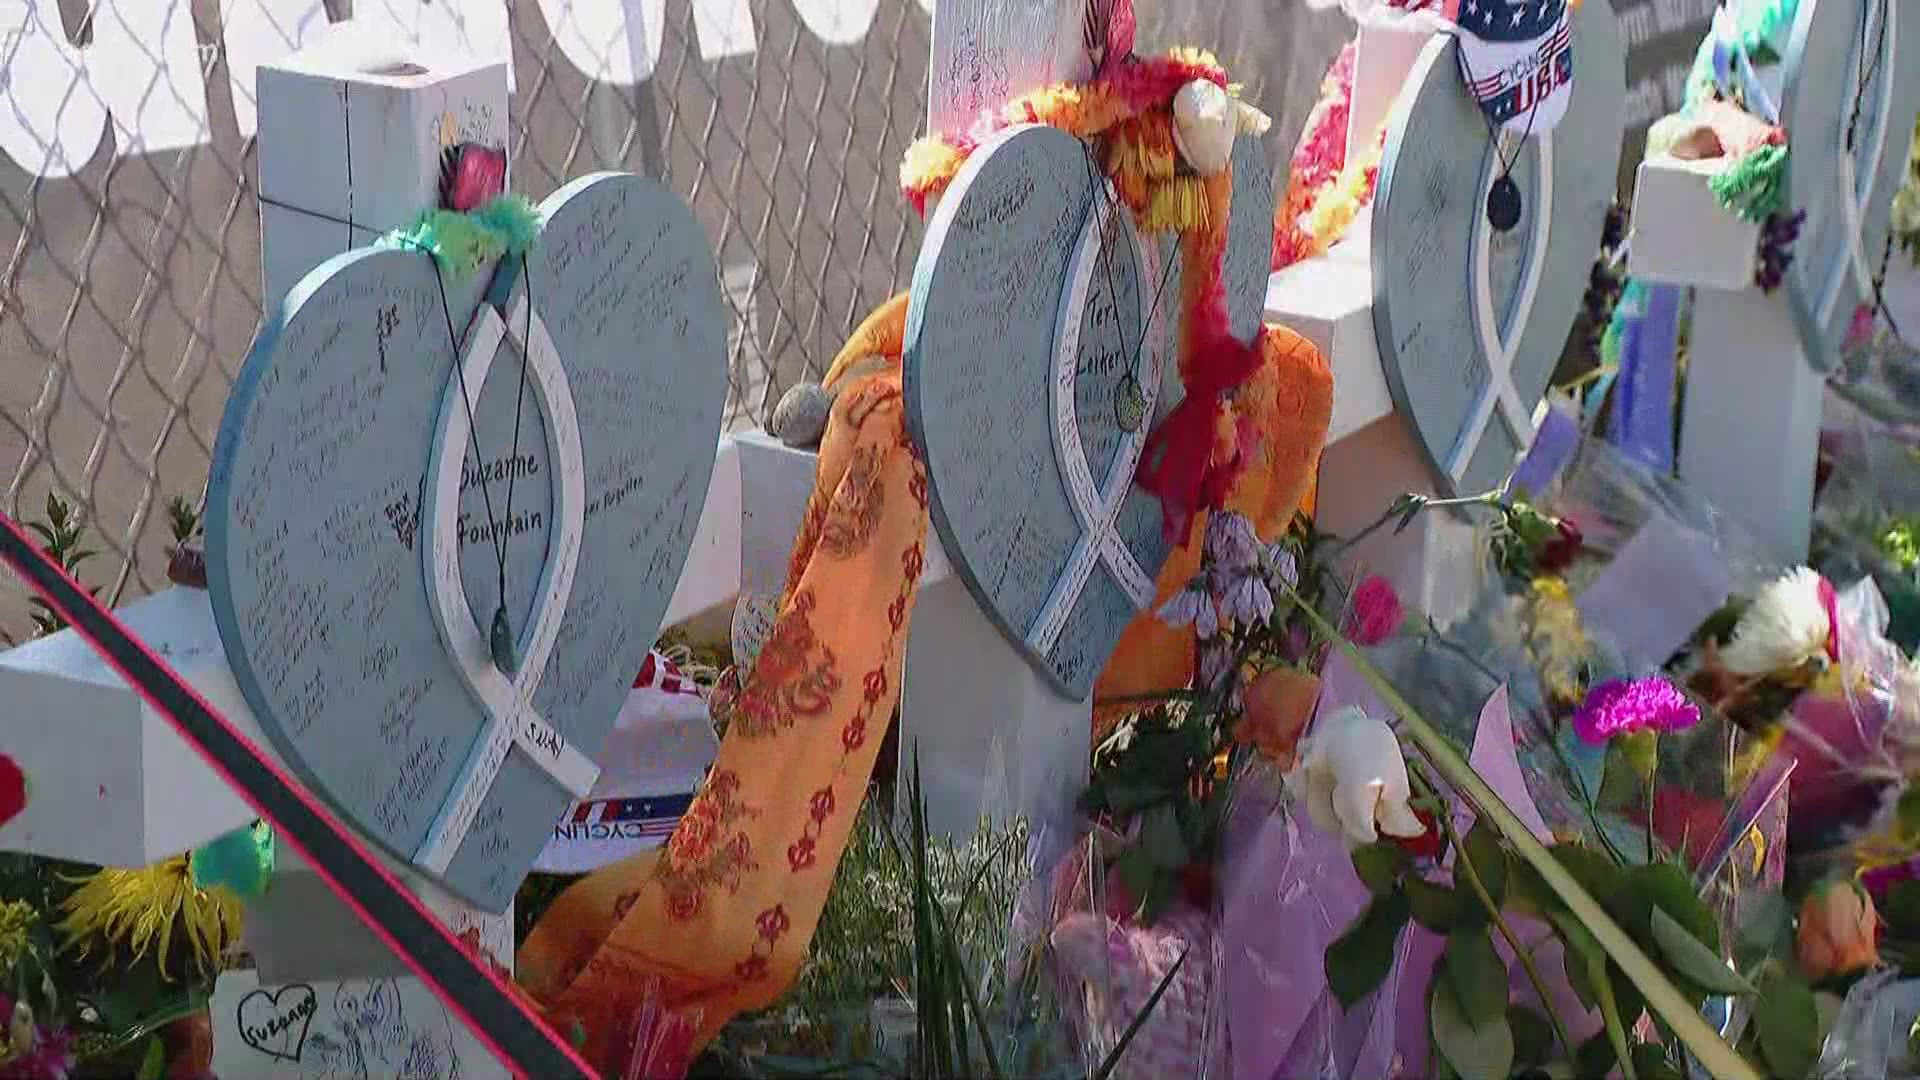 The Museum of Boulder preserves items, art and momentos left at the ever-growing memorial on the fence surrounding the supermarket on Table Mesa.